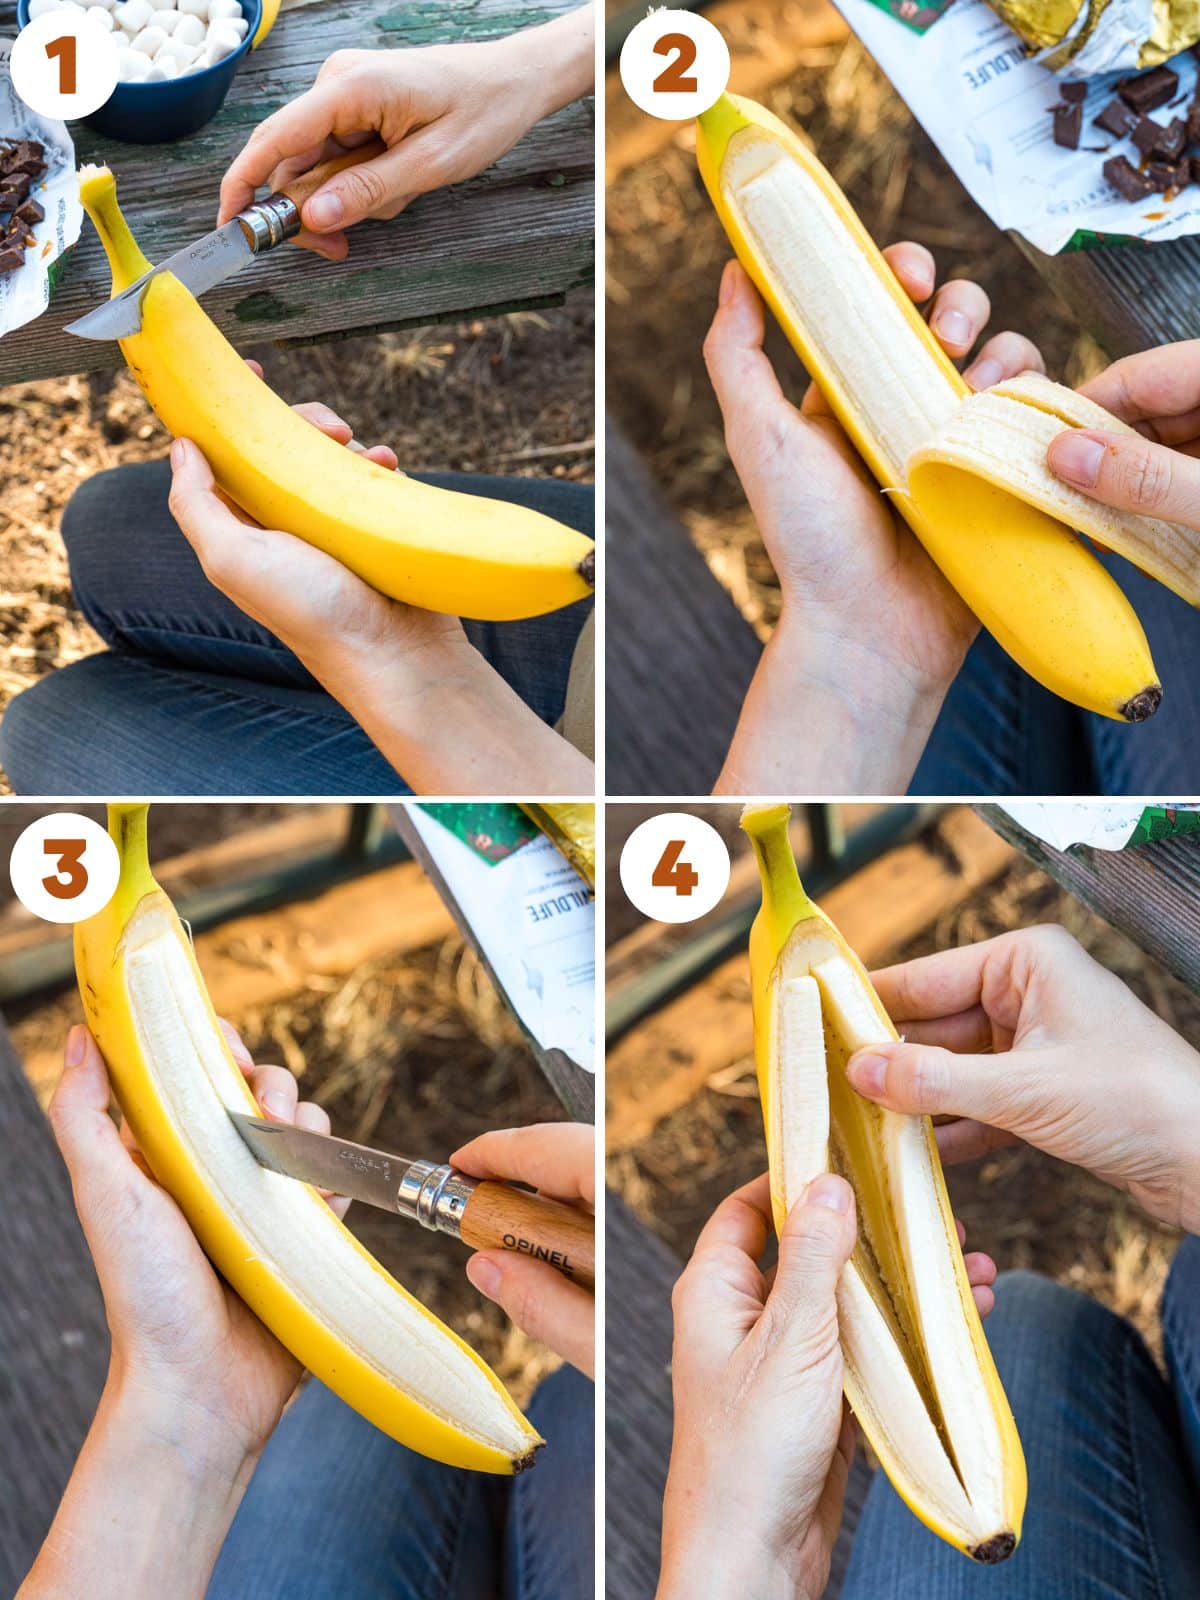 Cut a banana down the middle